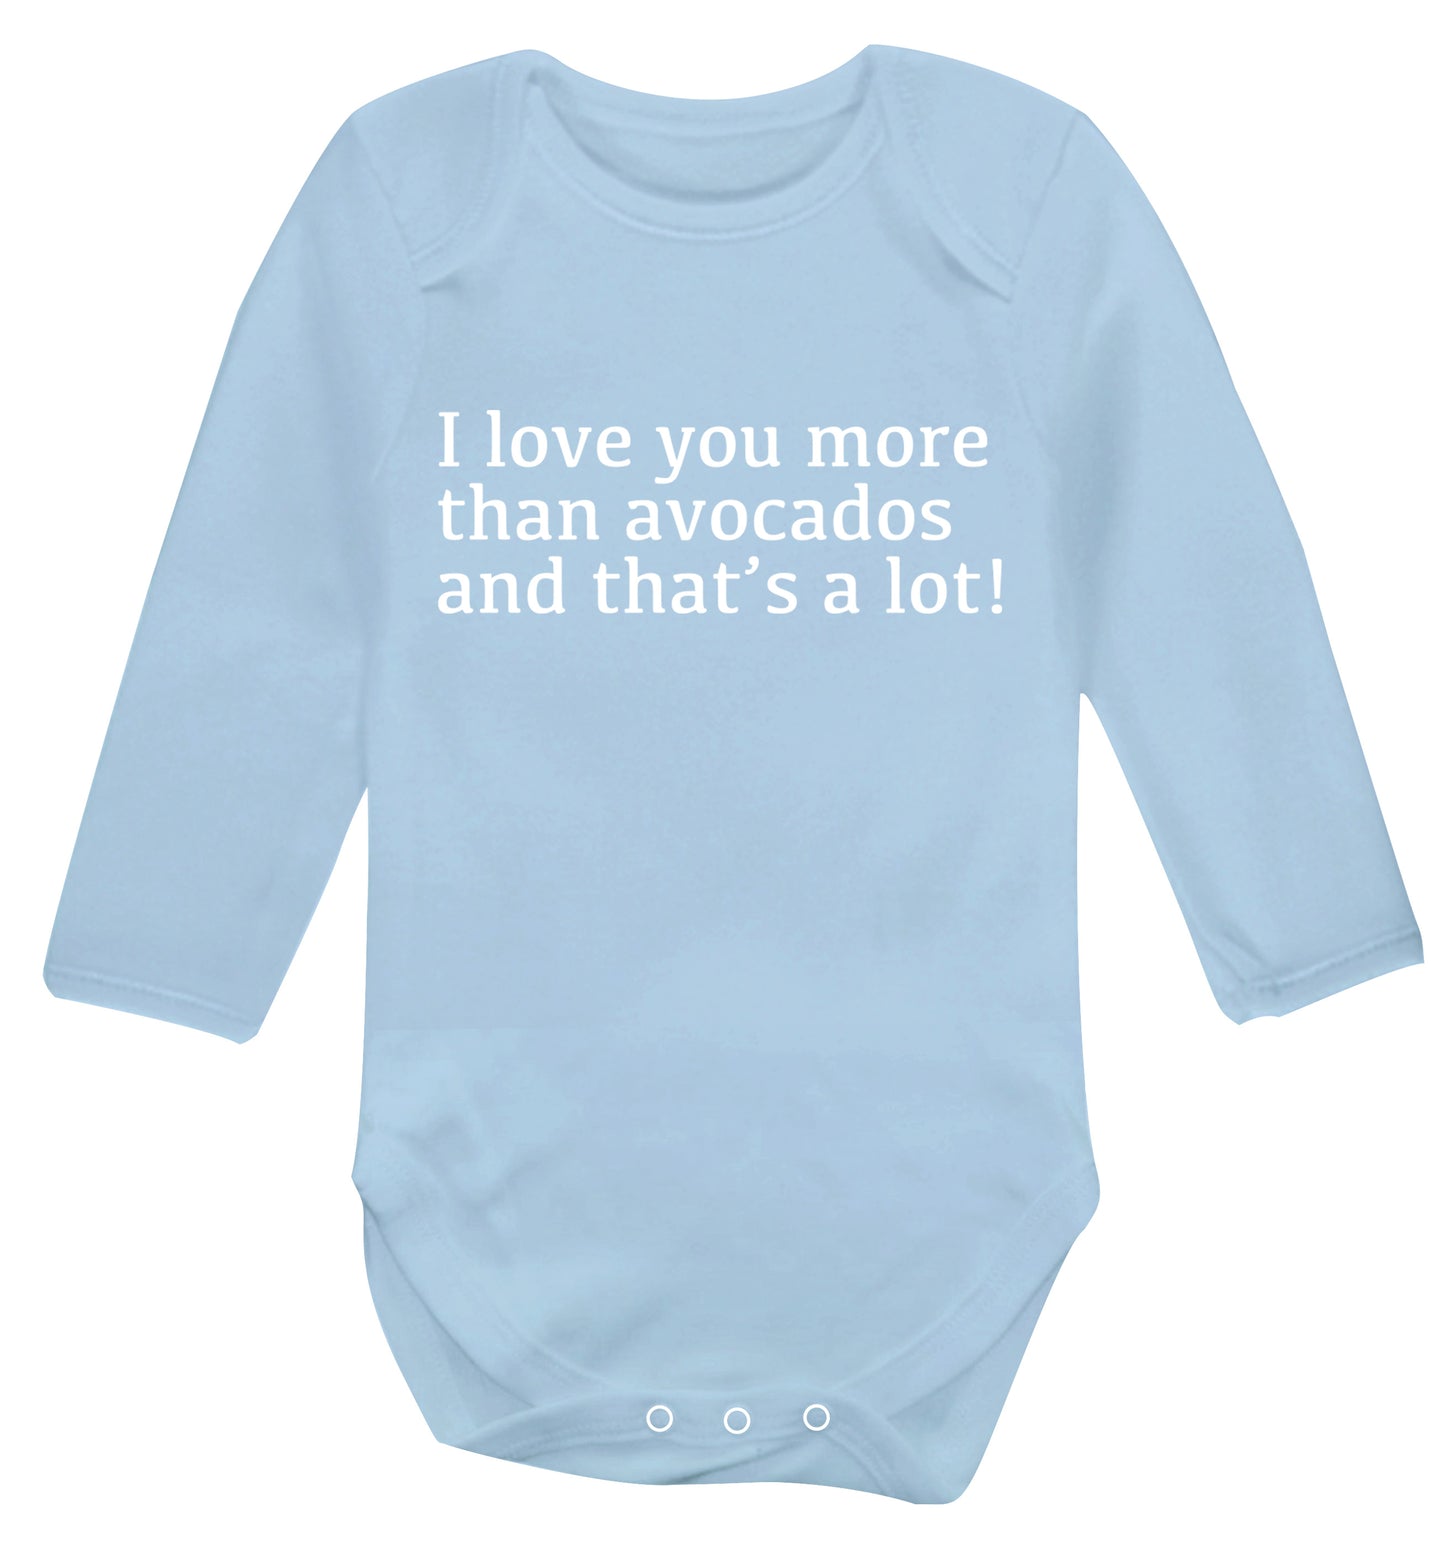 I love you more than avocados and that's a lot Baby Vest long sleeved pale blue 6-12 months